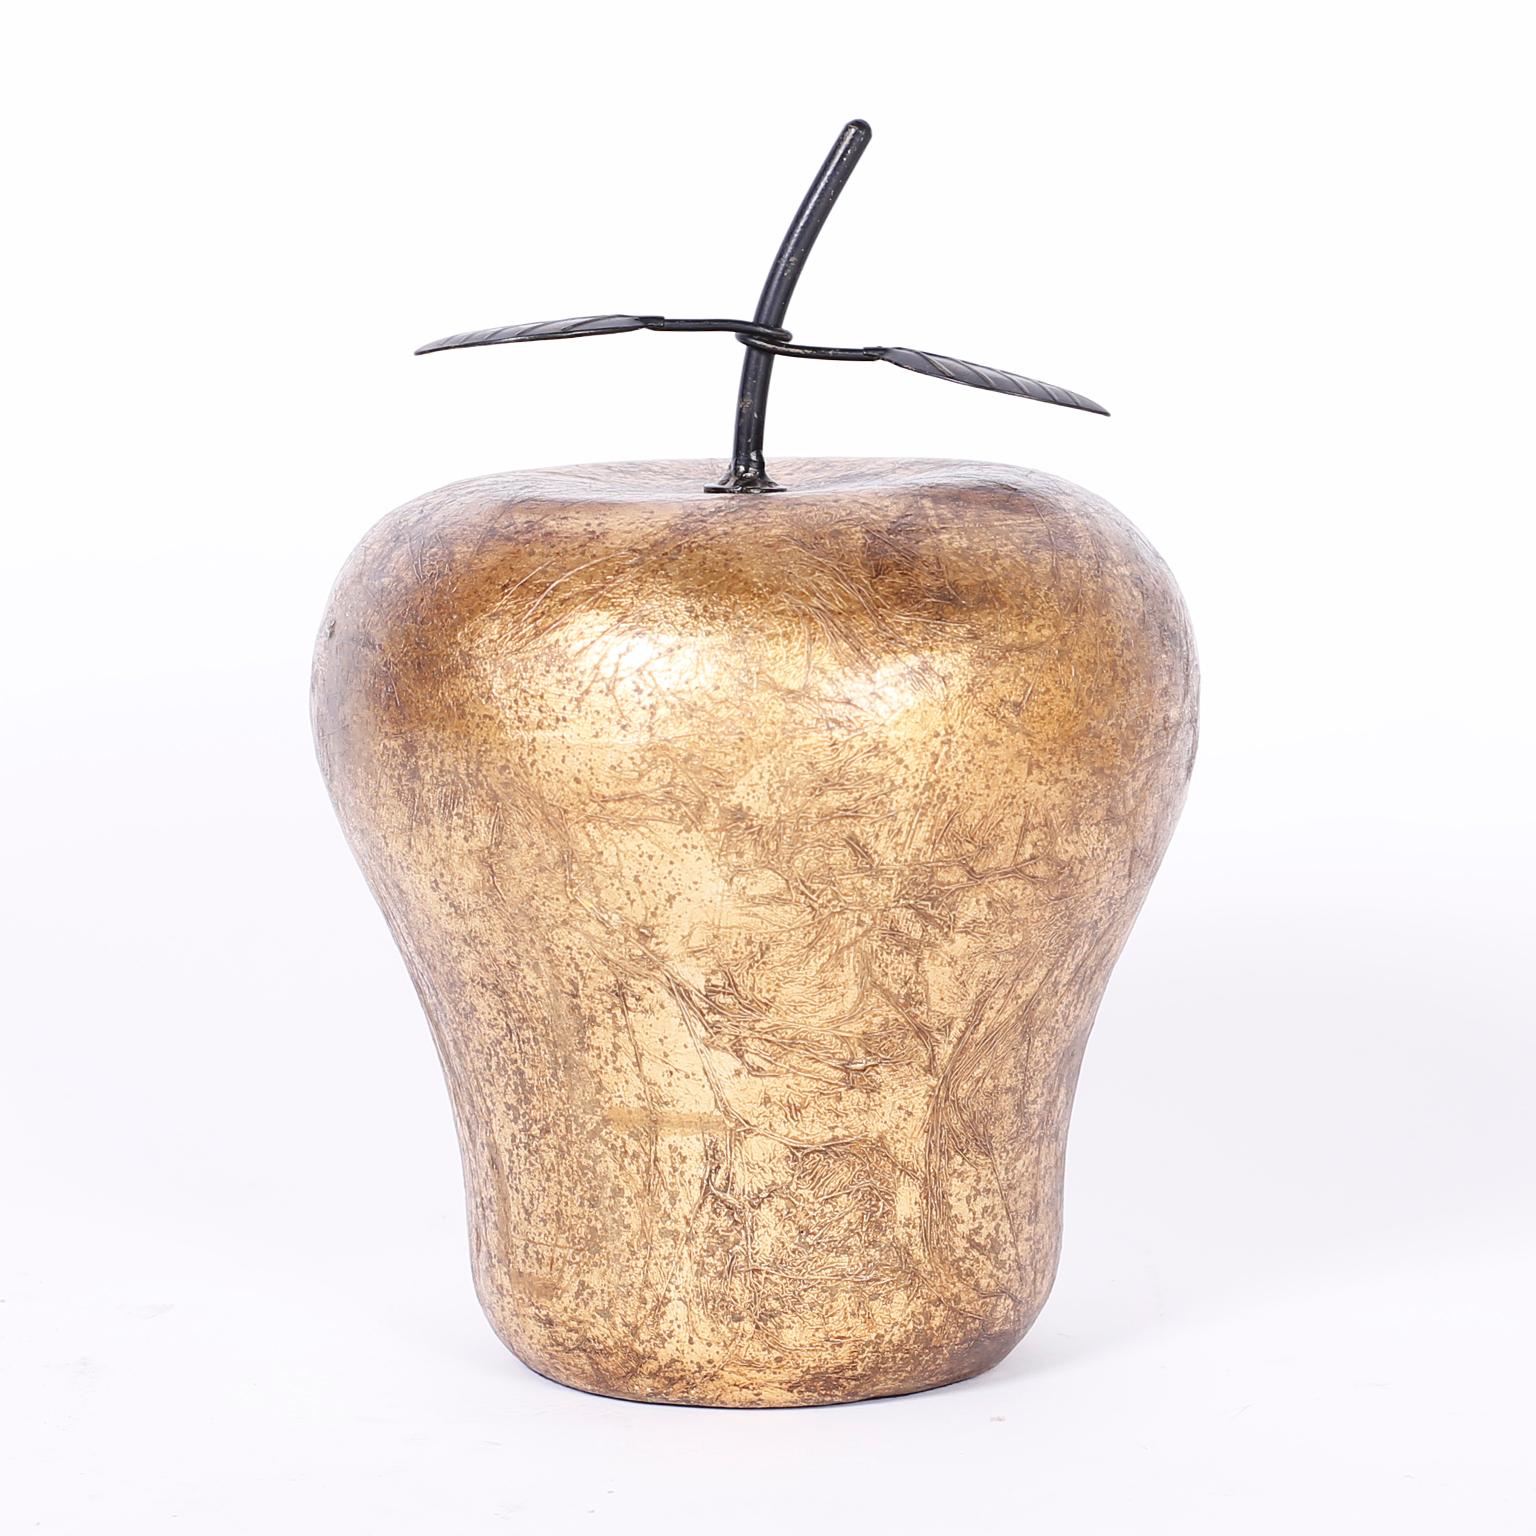 Large sculptural apple and pear crafted in porcelain and decorated with textured gold leaf with metal leaves. Priced individually. 

Apple measures: H 13, DM 9

Pear measures: H 16, DM 9.